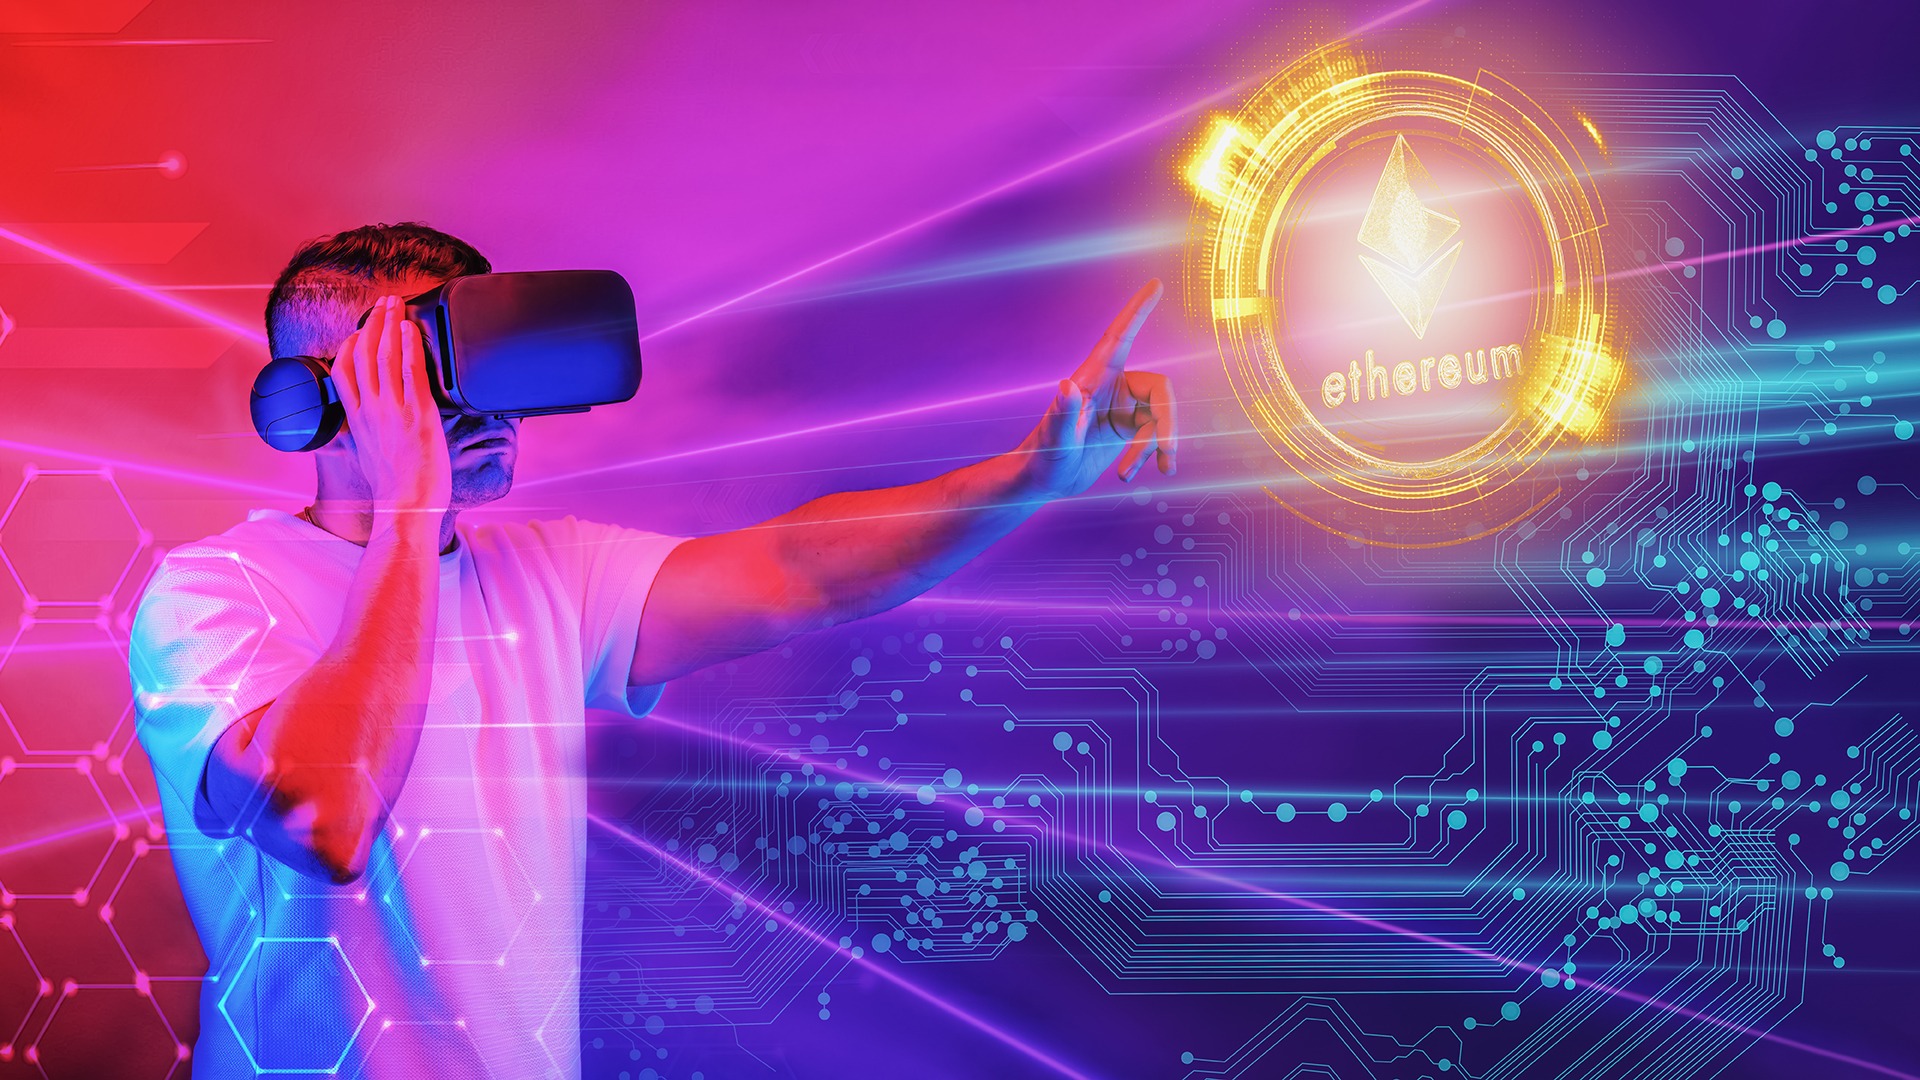 A man is holding a VR headset in front of a financial landscape and colourful Ethereum background.